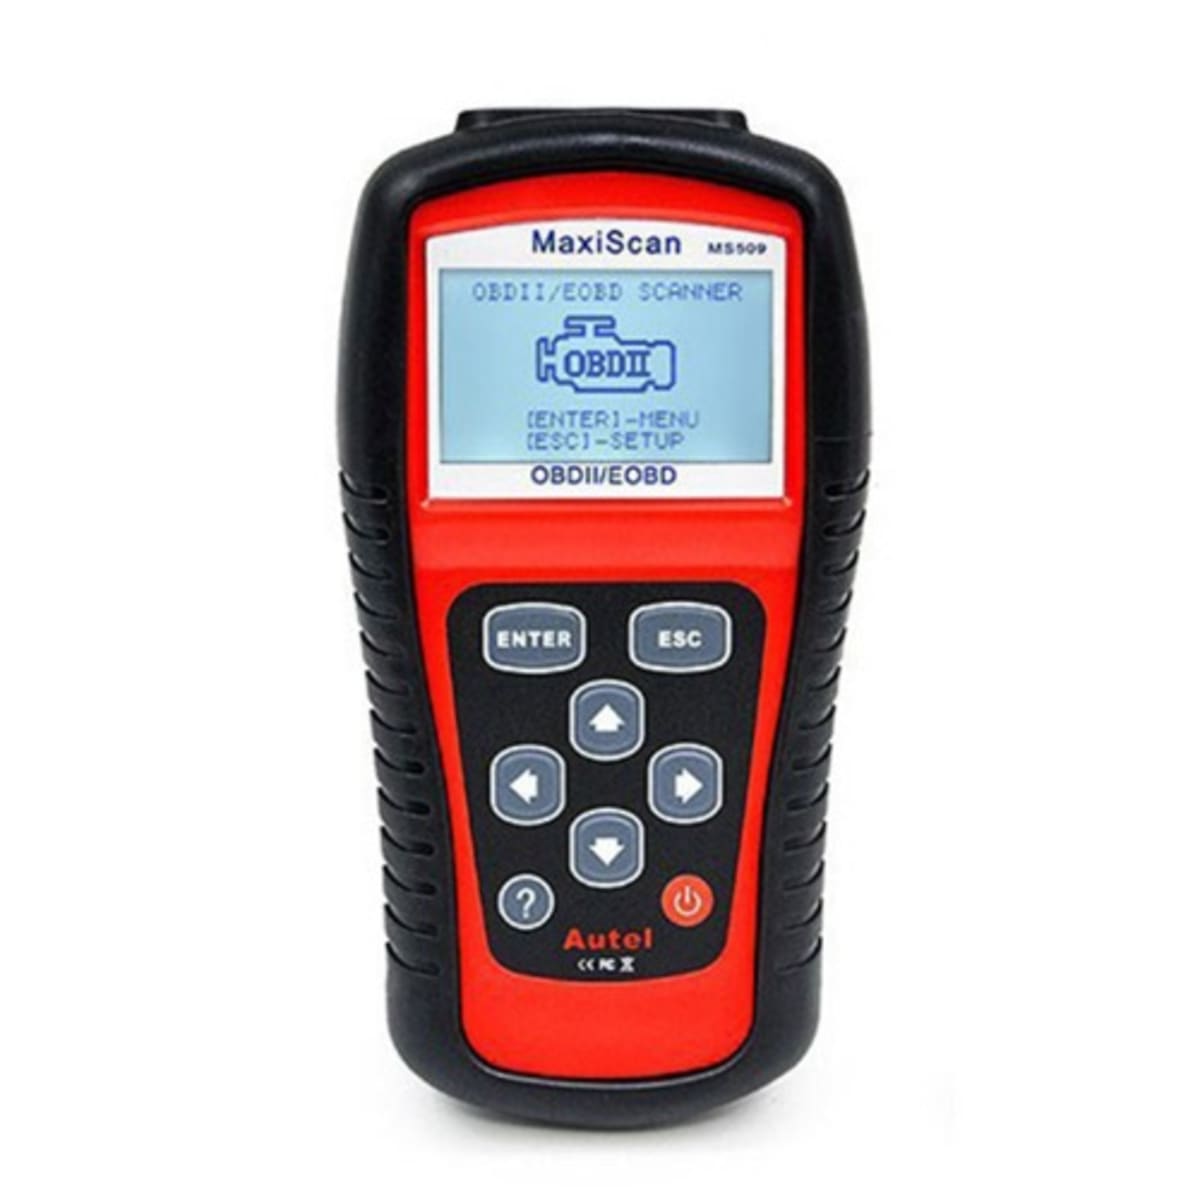 Maxiscan Ms509 Obd Scan Tool Obd2 Scanner | Konga Online Shopping